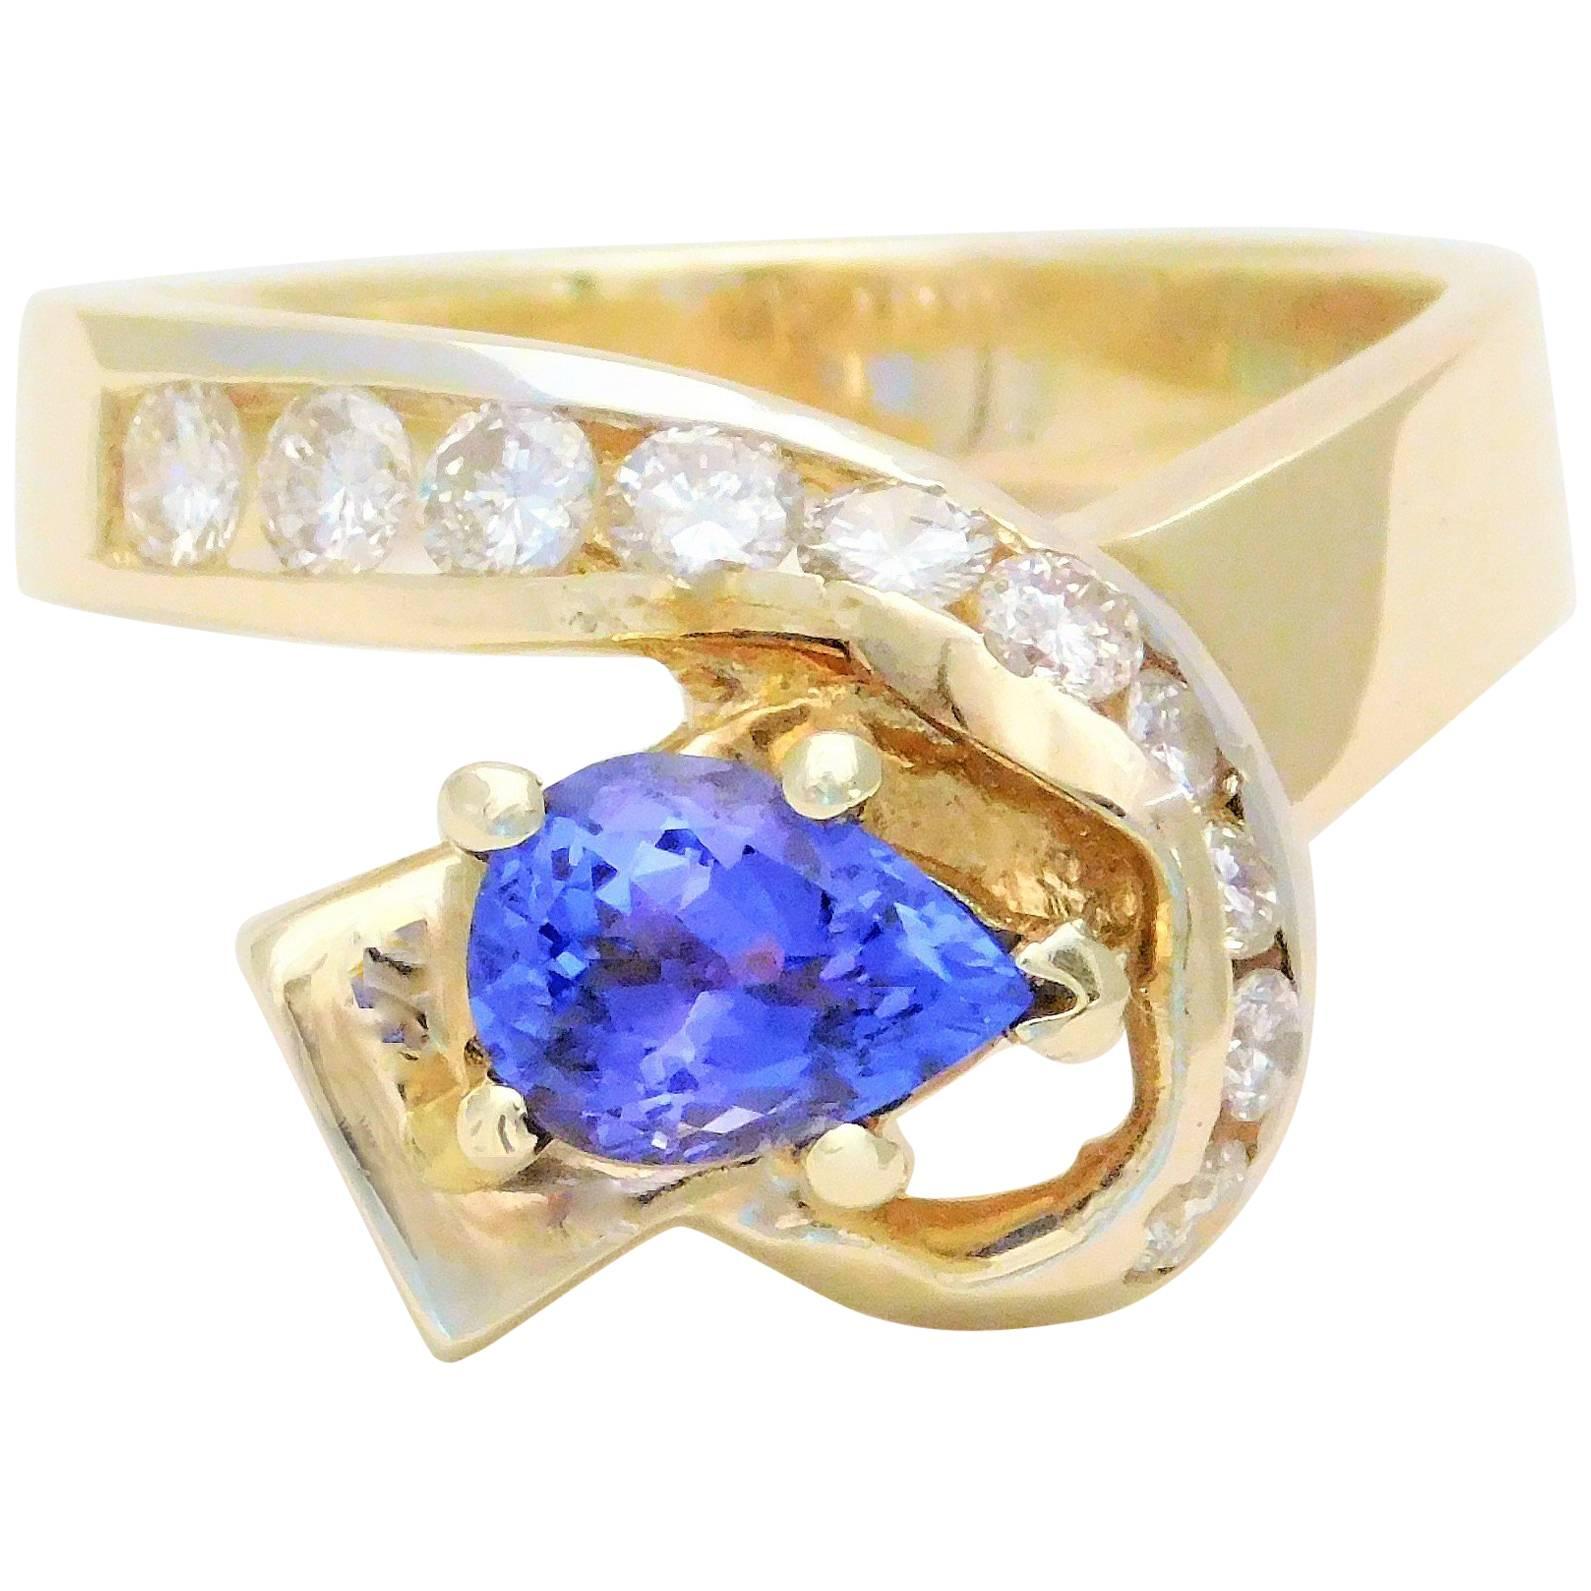 Tanzanite, the relatively rare and costly Gem, only comes from one place in the world, the Merelani Hills in Tanzania, East Africa.   It is one of the most valuable of all metaphysical crystals for spiritual exploration, bringing together all